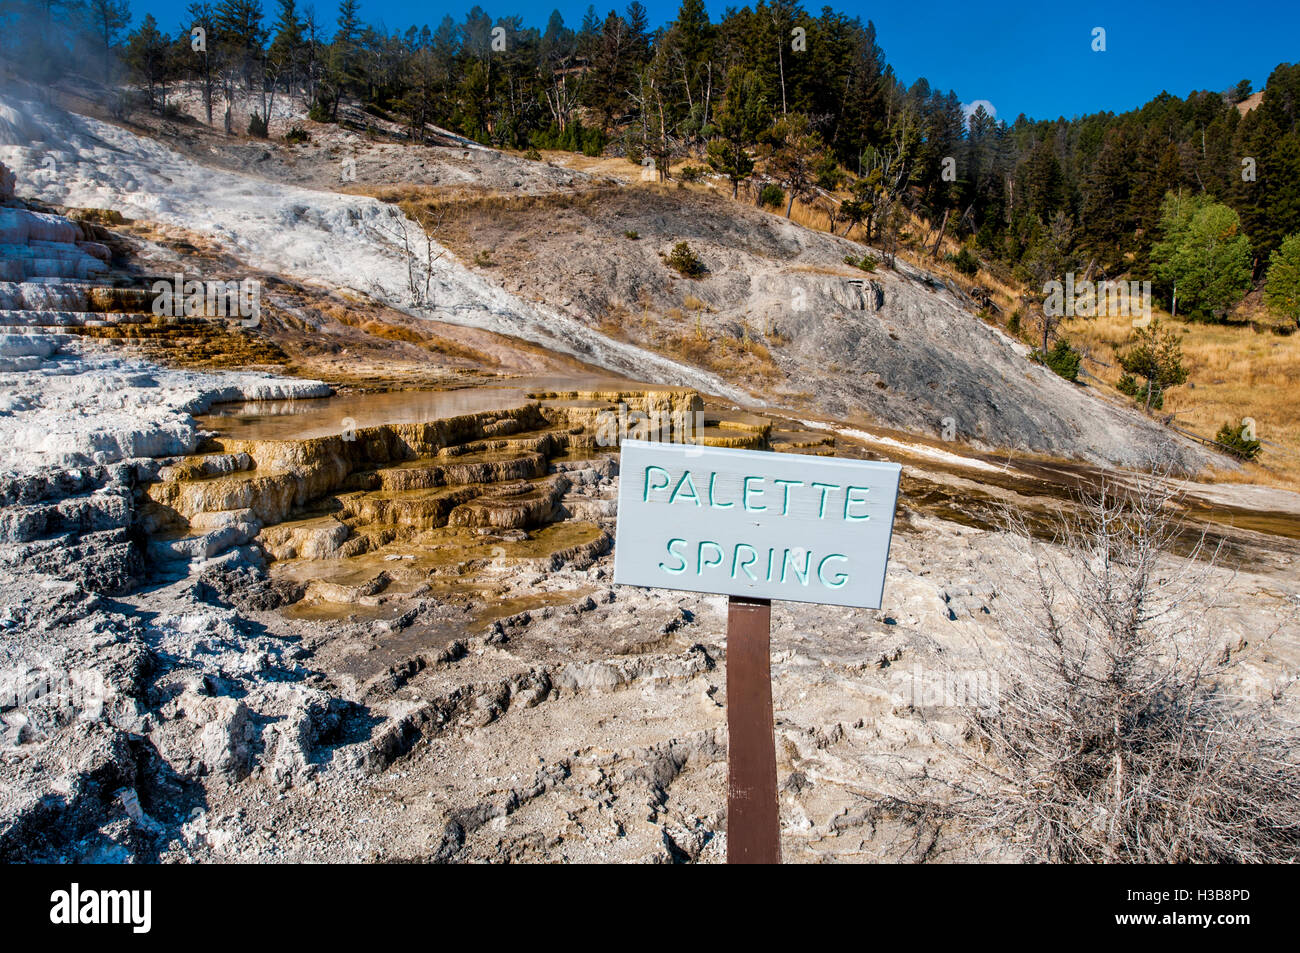 Palette Spring Mammoth Hot Springs terraces Yellowstone National Park, Wyoming, USA. Stock Photo